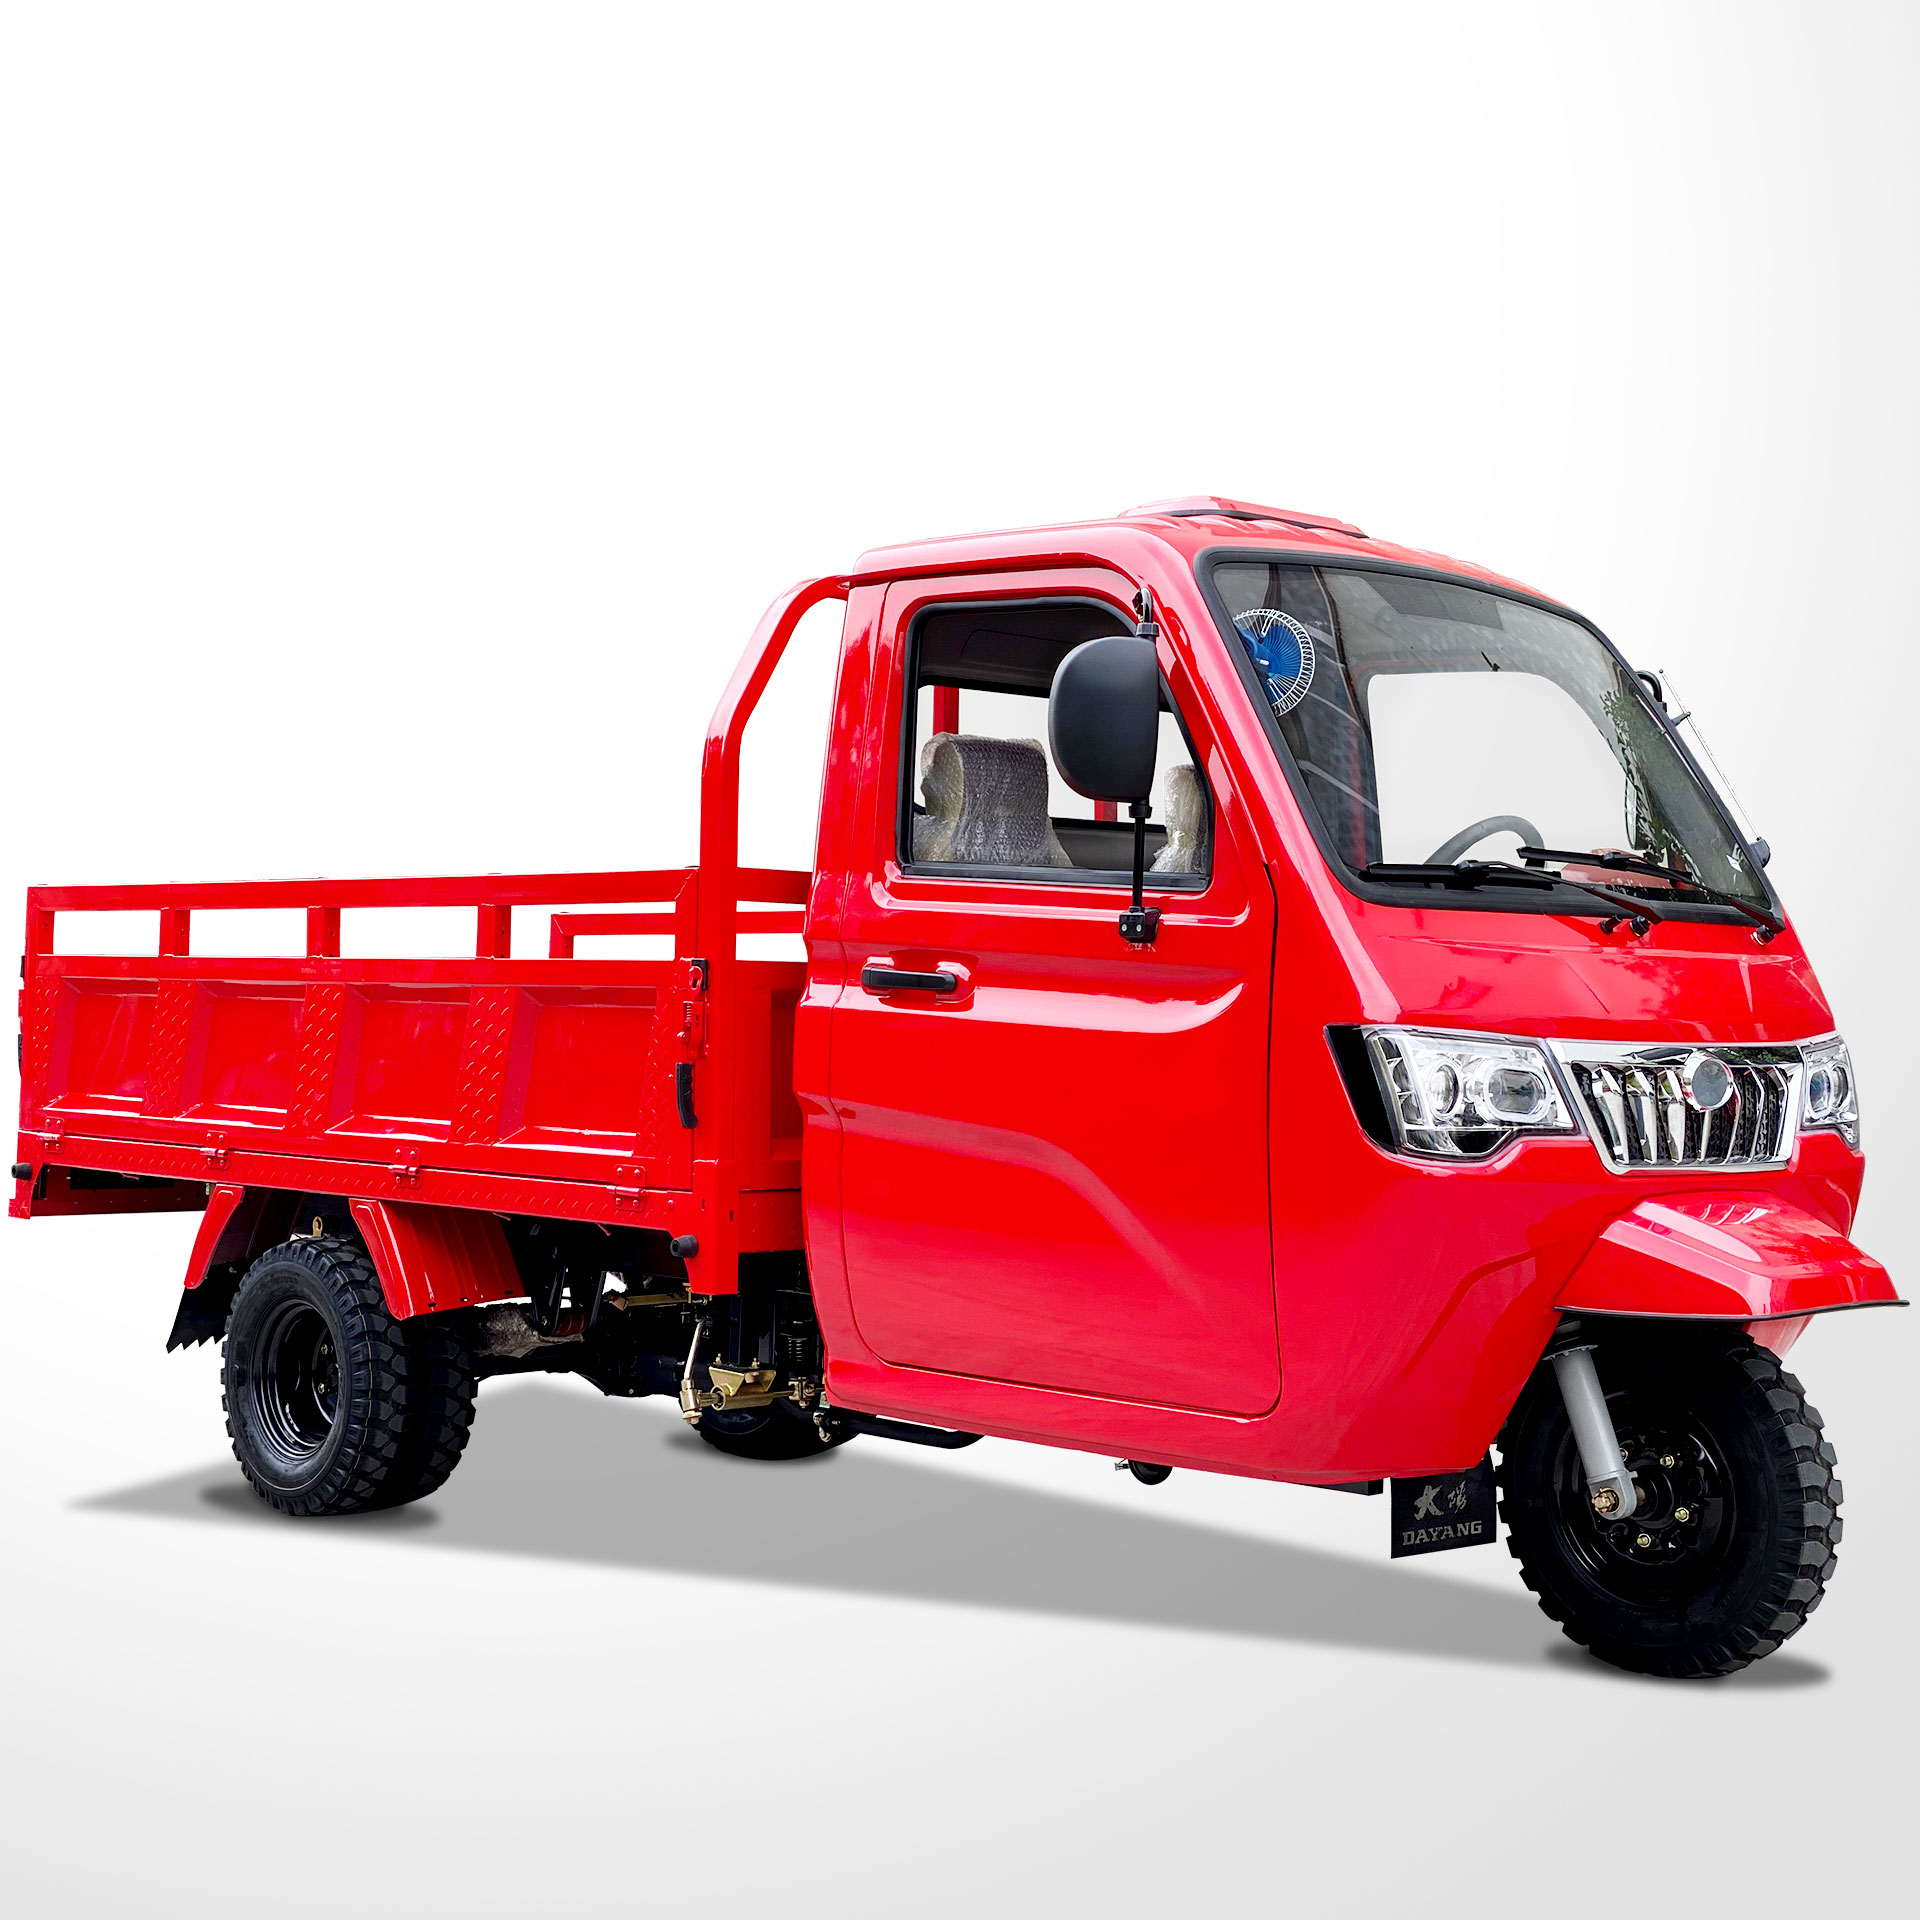 China manufacture cheapest high horsepower 250cc hot gasoline engine hanicap closed body cargo tricycle